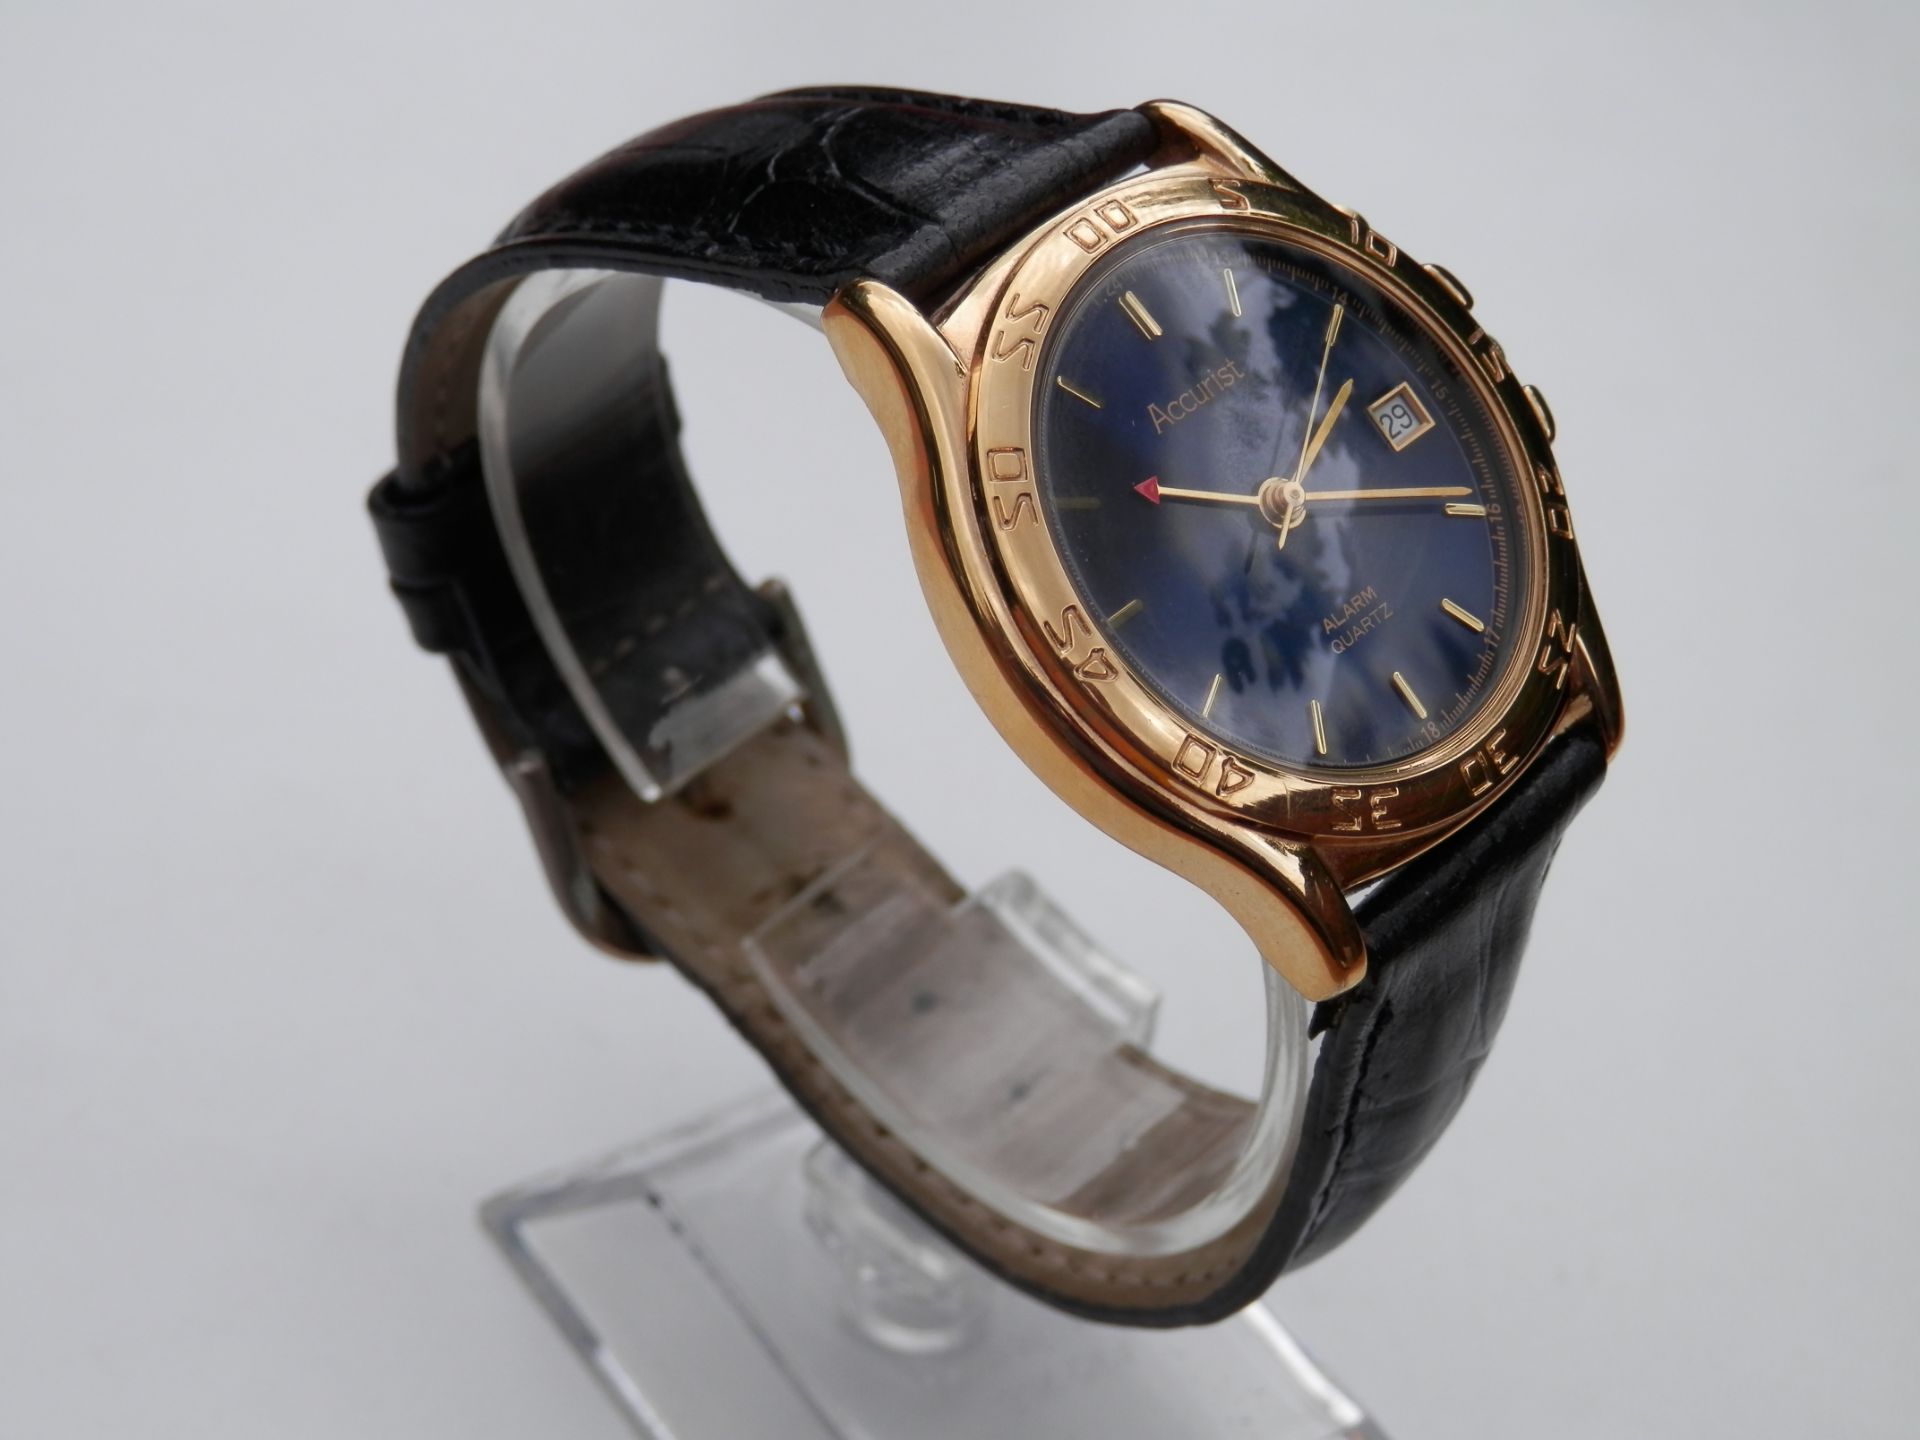 FULLY WORKING 1990S ACCURIST GENTS GOLD PLATED ANALOGUE ALARM QUARTZ WATCH, METALLIC BLUE DIAL. - Image 3 of 8